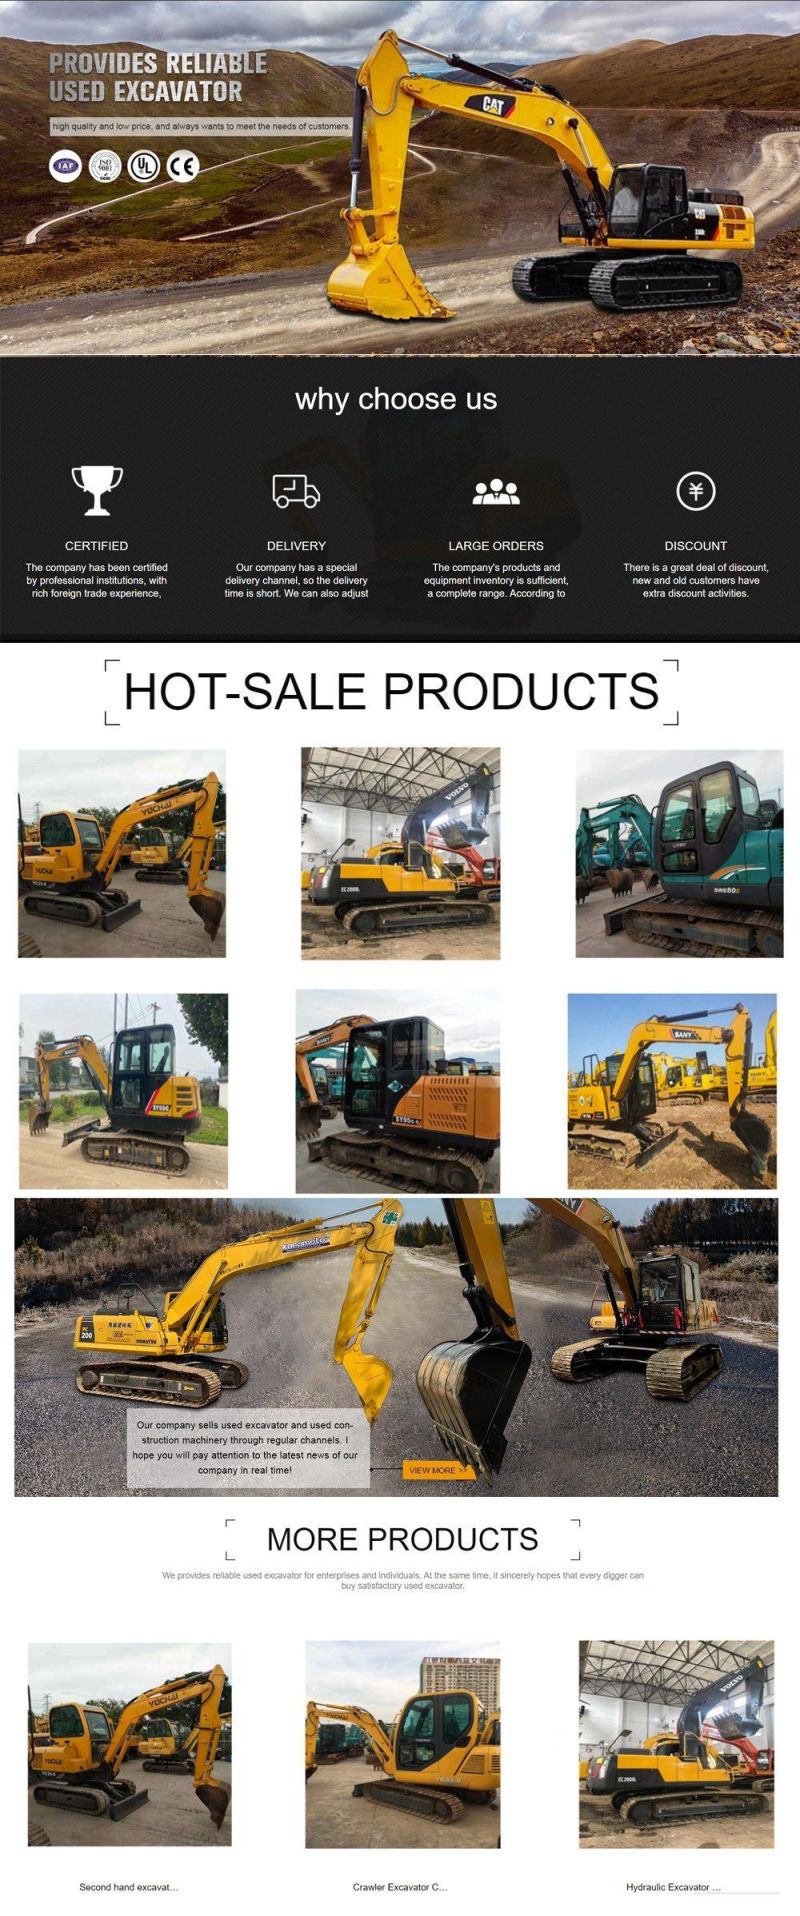 2021 Hot Sell 2016 Used Second Hand 11 Ton Hyundai110LC Excavator From China Very Cheap Selling in Mongolia